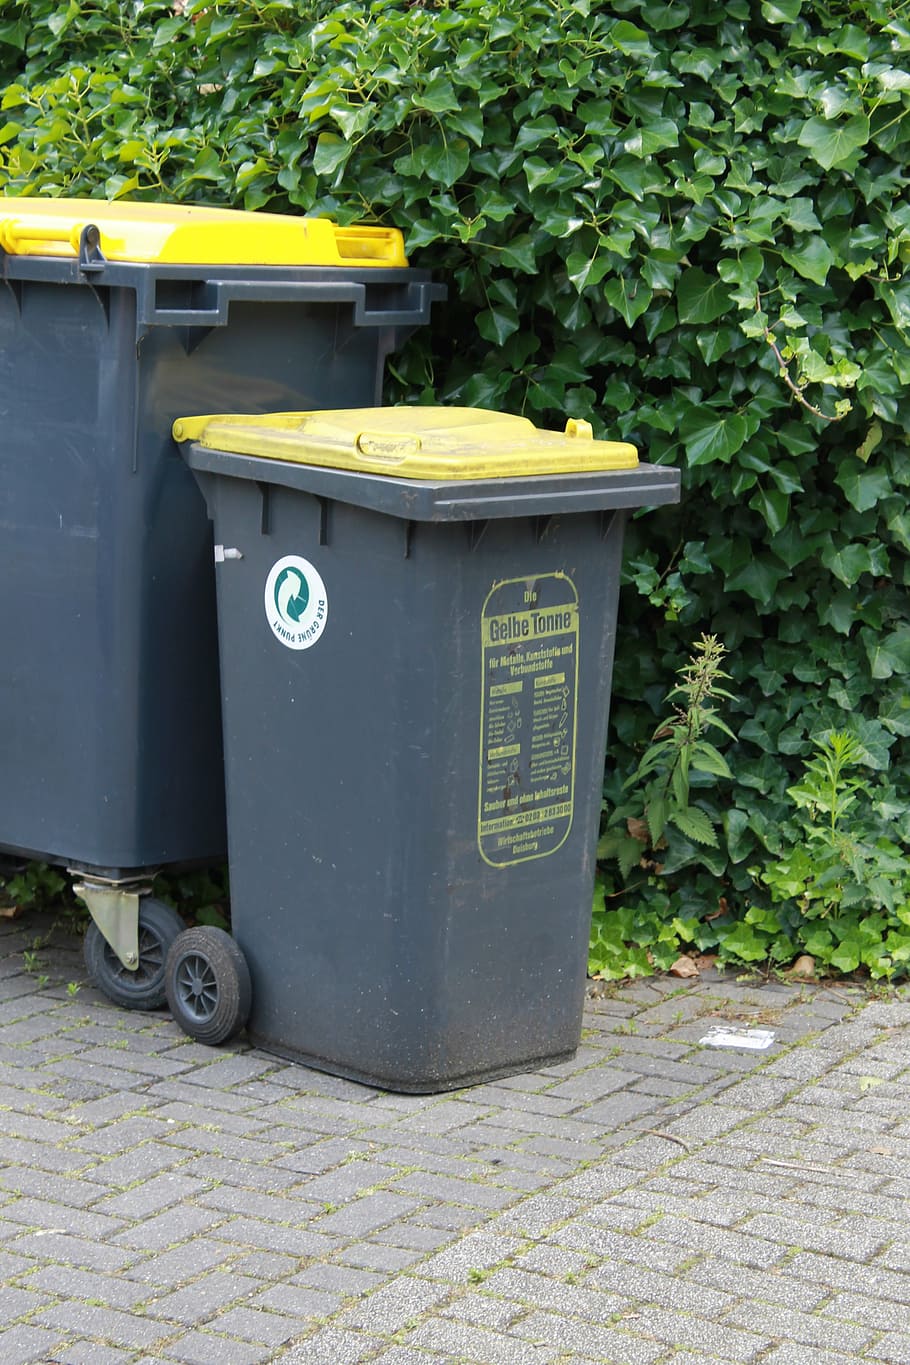 yellow ton, garbage can, waste, garbage bin, recycling, recycling bin, day, plant, nature, environmental issues